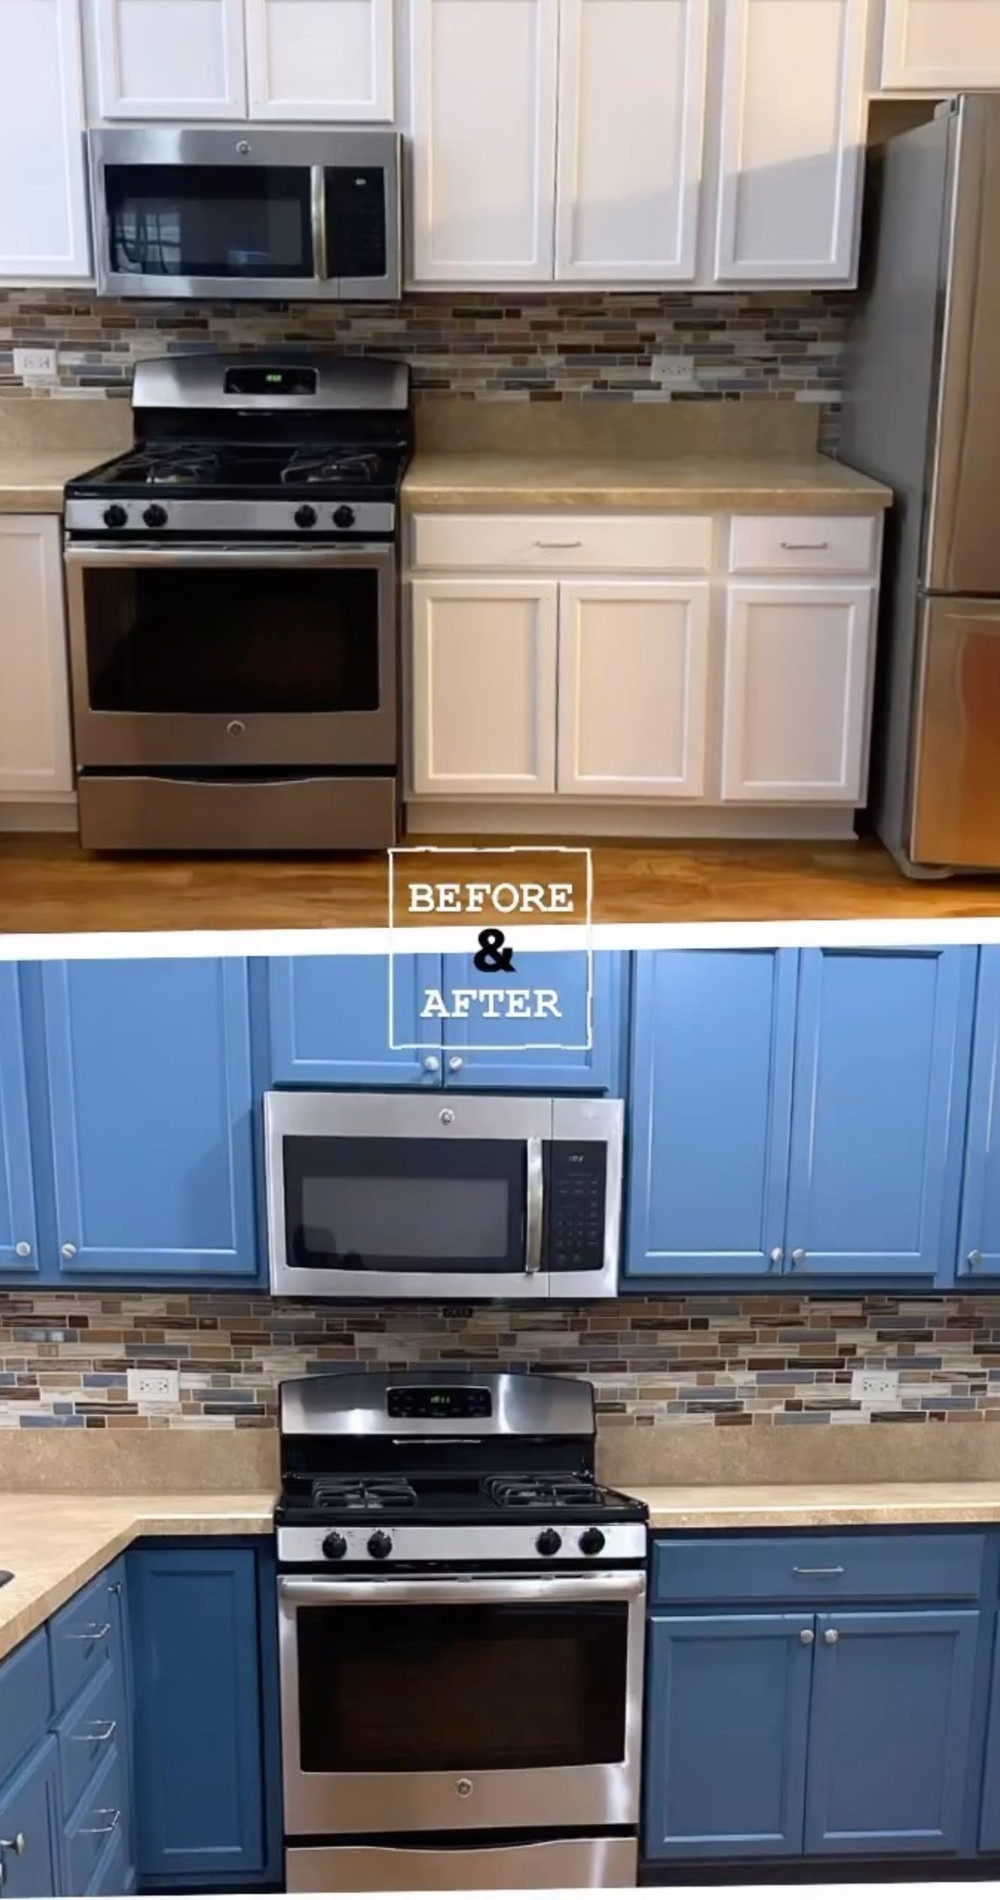 Painted kitchen cabinets before after from white cabinets to painting kitchen cabinets blue